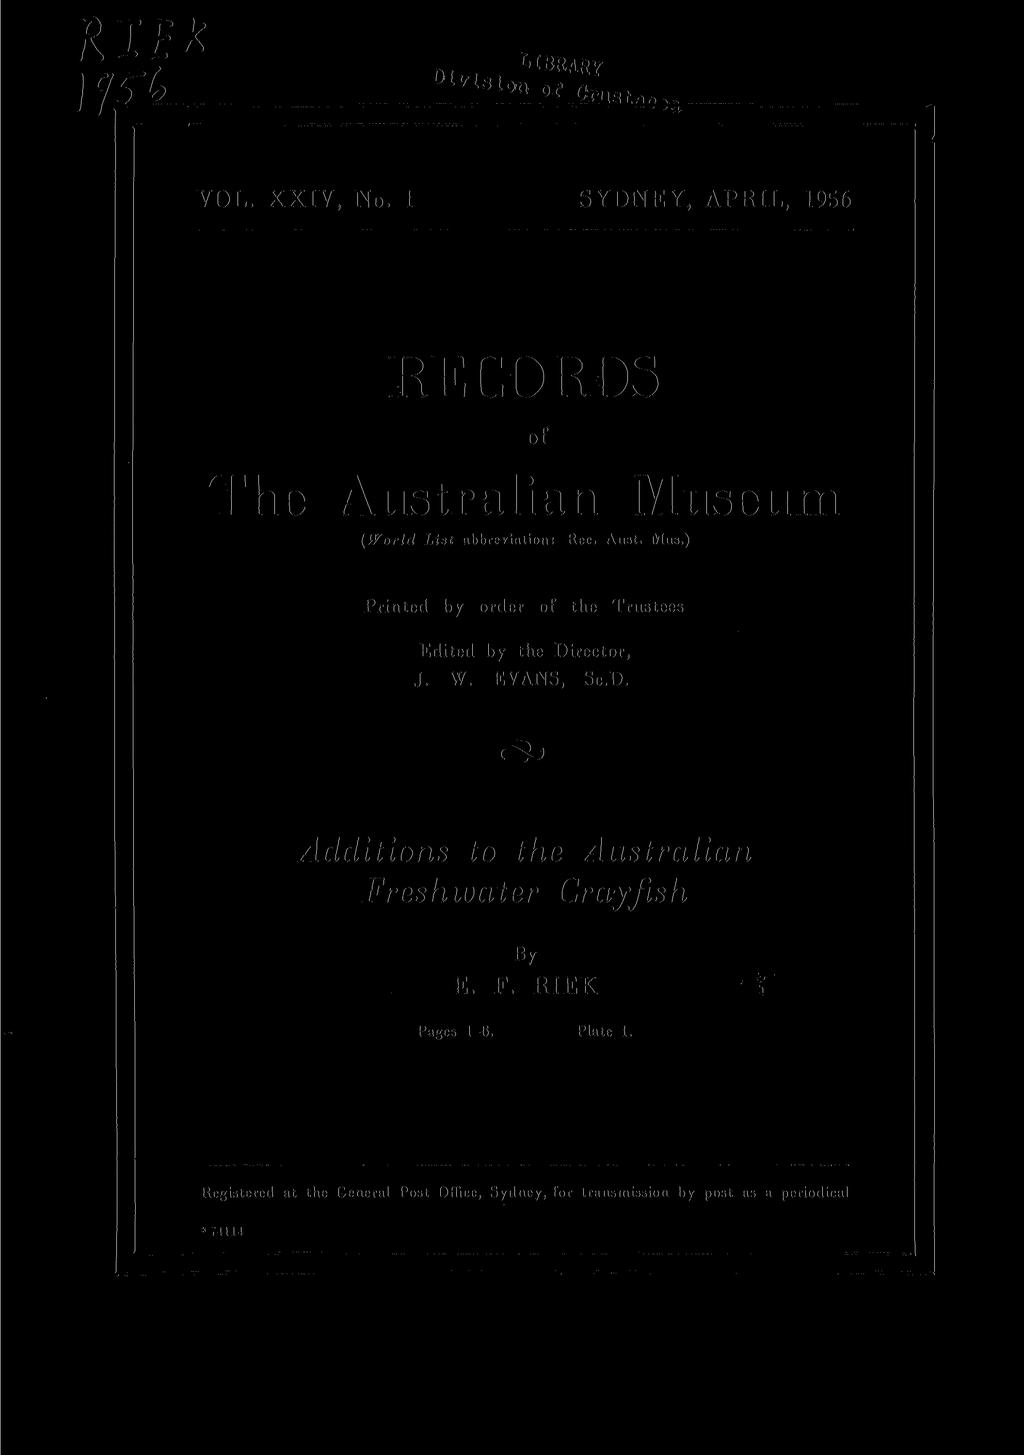 RIE* VOL. XXIV, No. 1 SYDNEY, APRIL, 1956 RECORDS of The Australian Museum (World List abbreviation: Rec. Aust. Mus.) Printed by order of the Trustees Edited by the Director, J. W.